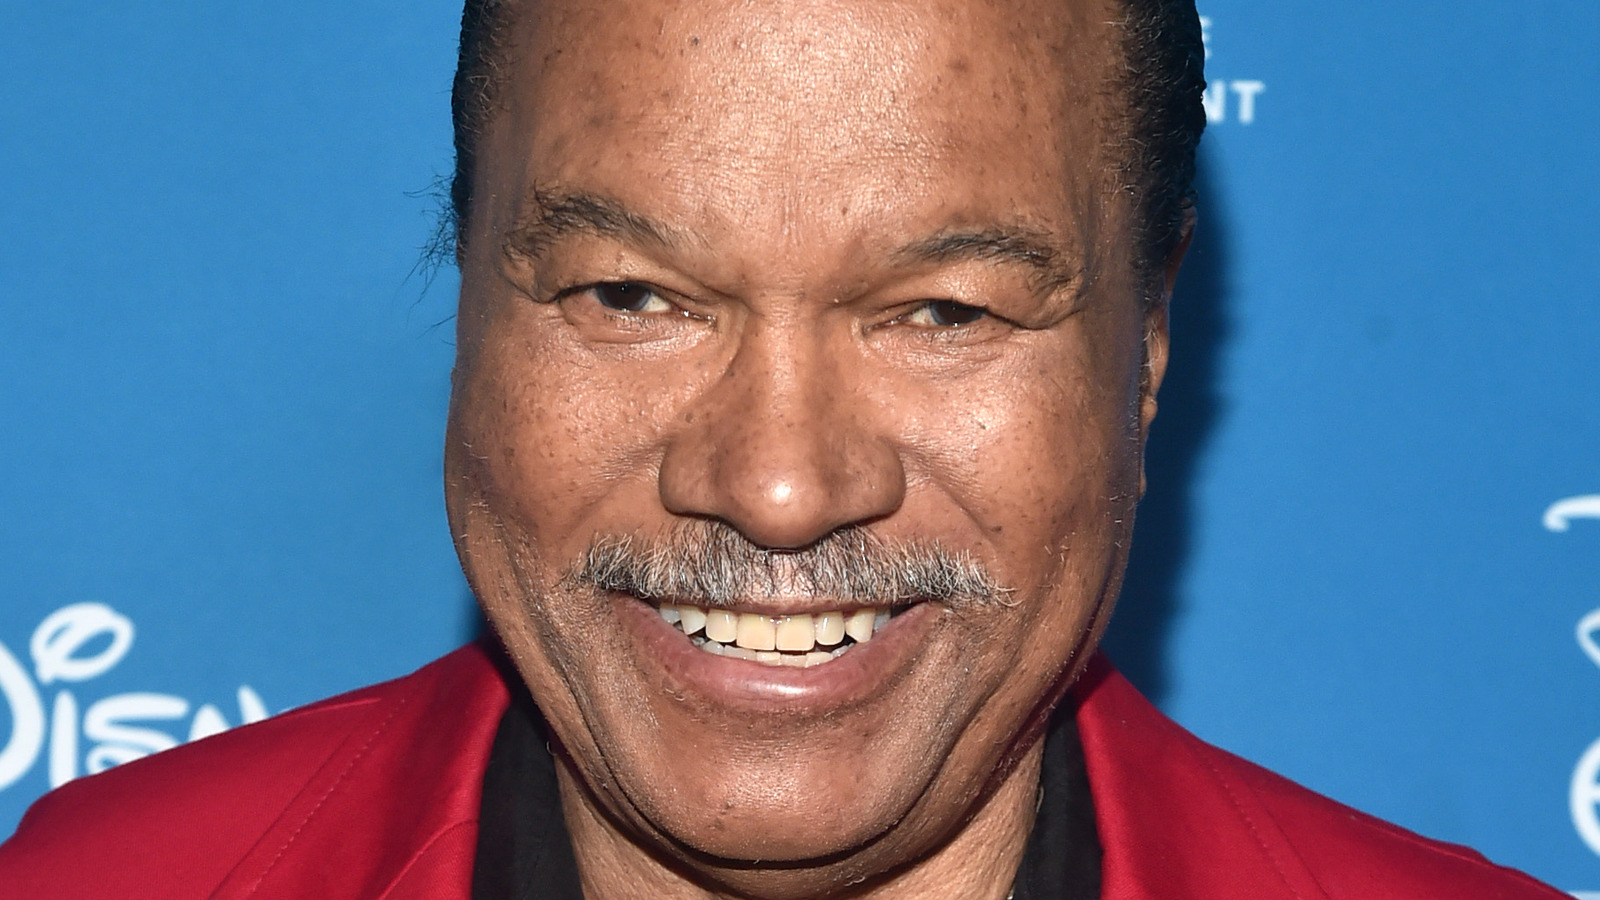 Star Wars Actor Billy Dee Williams Identifies With Both 'Himself